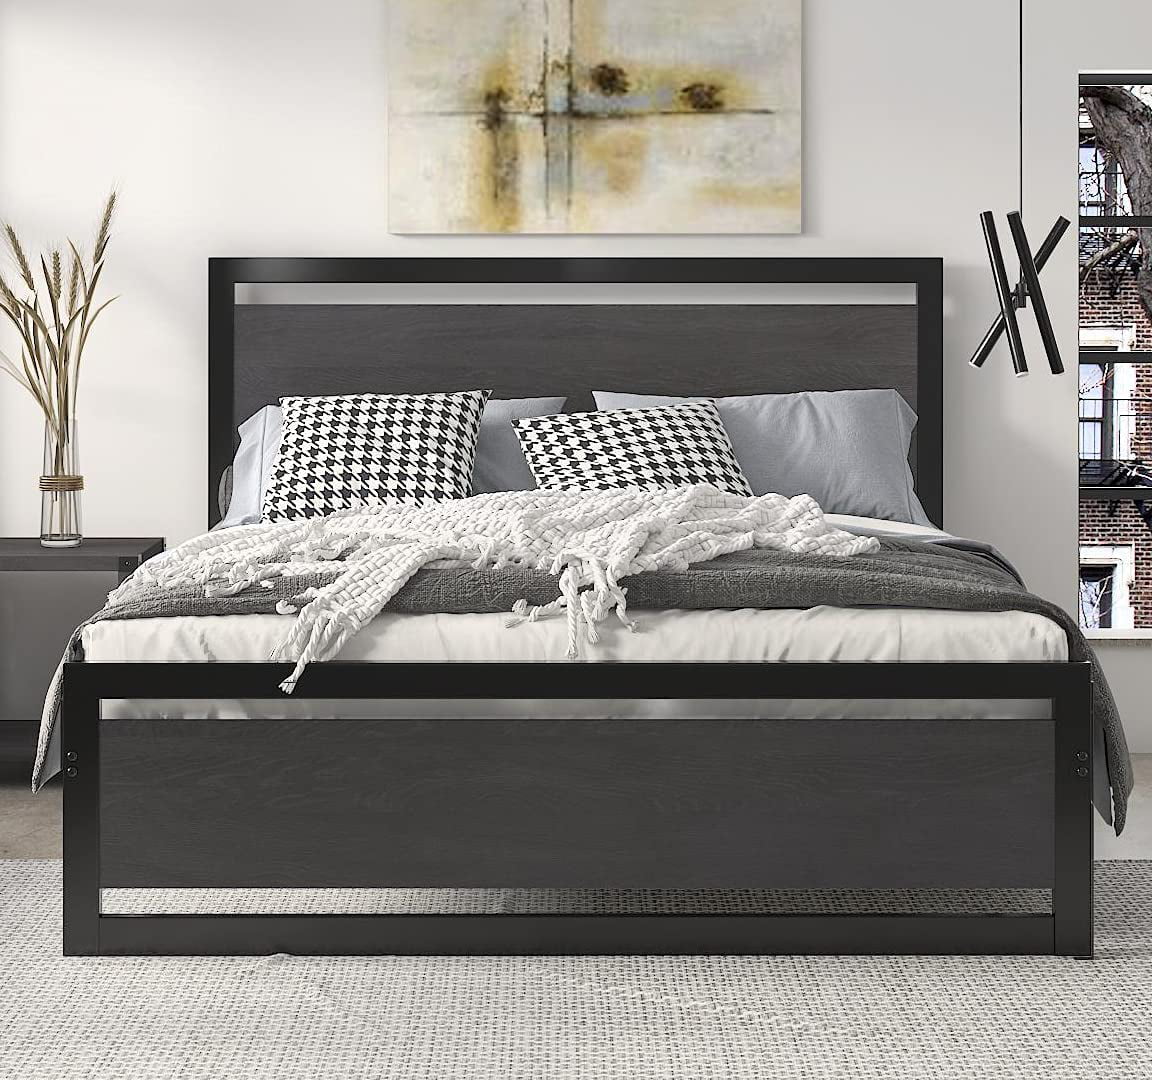 Black Bed Frame With Wooden Headboard, Black Bed Headboard